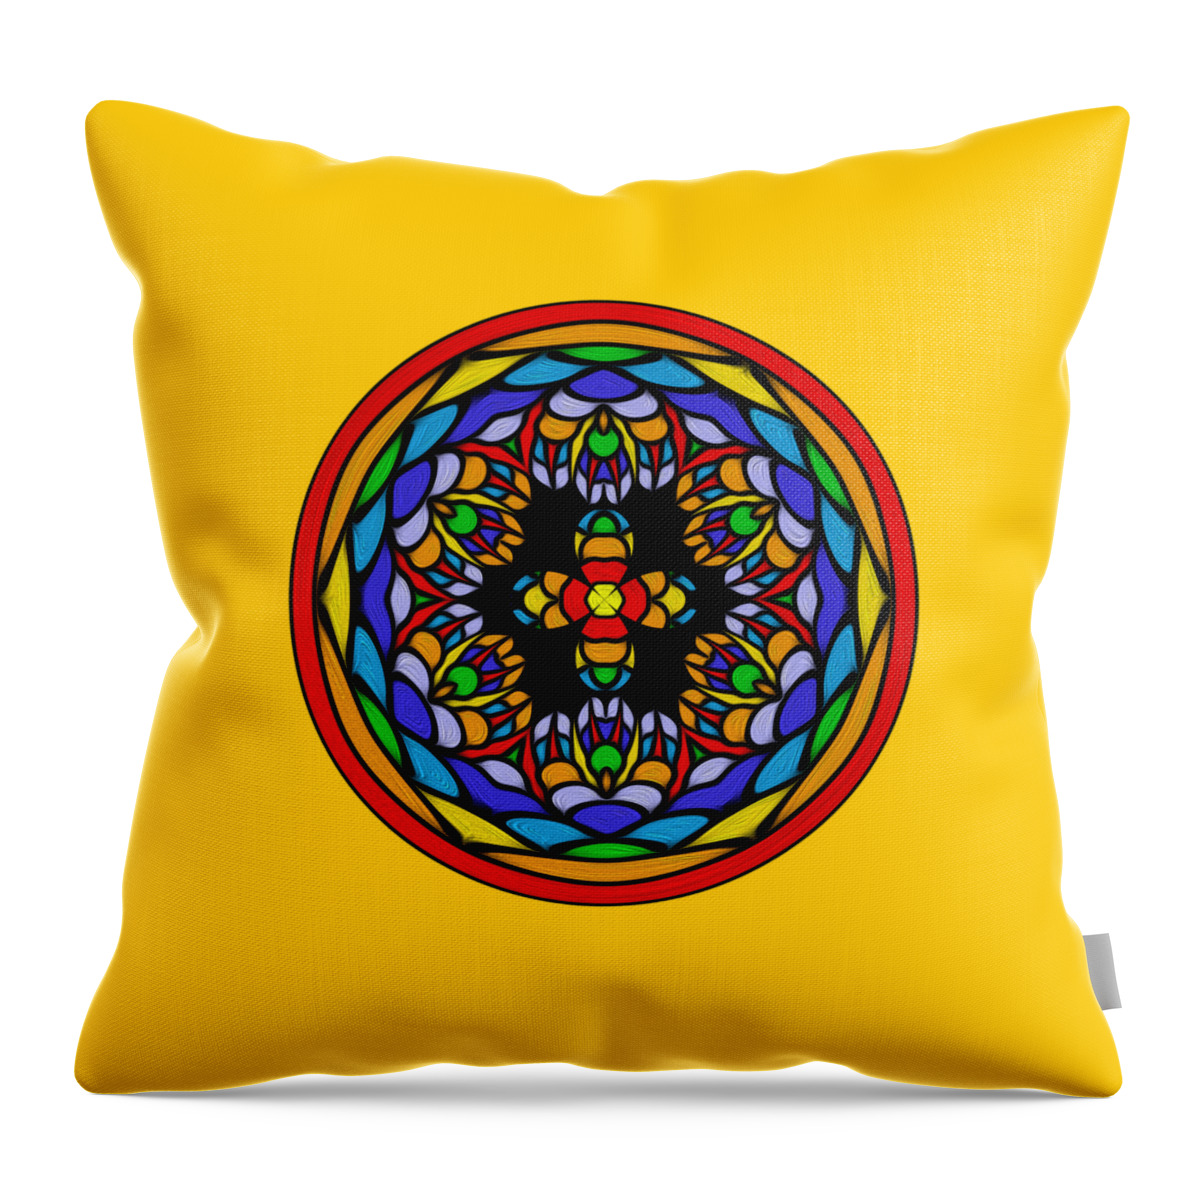 Digital Art Throw Pillow featuring the digital art Vibrant Pattern Orb by Kaye Menner by Kaye Menner